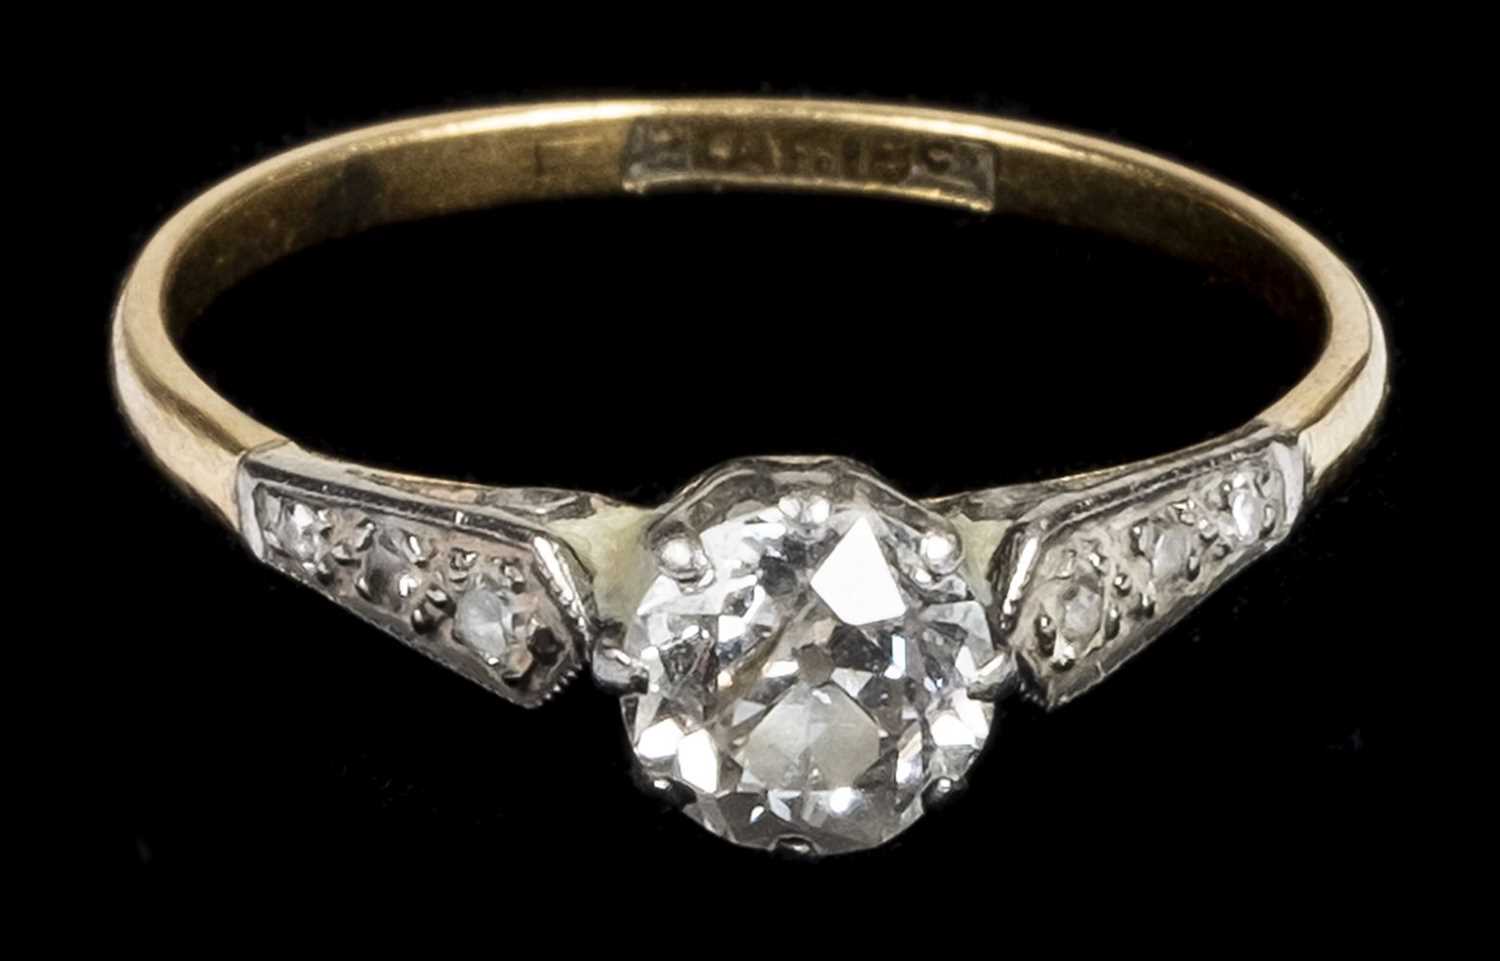 Lot 20 - Ring. A diamond solitaire ring